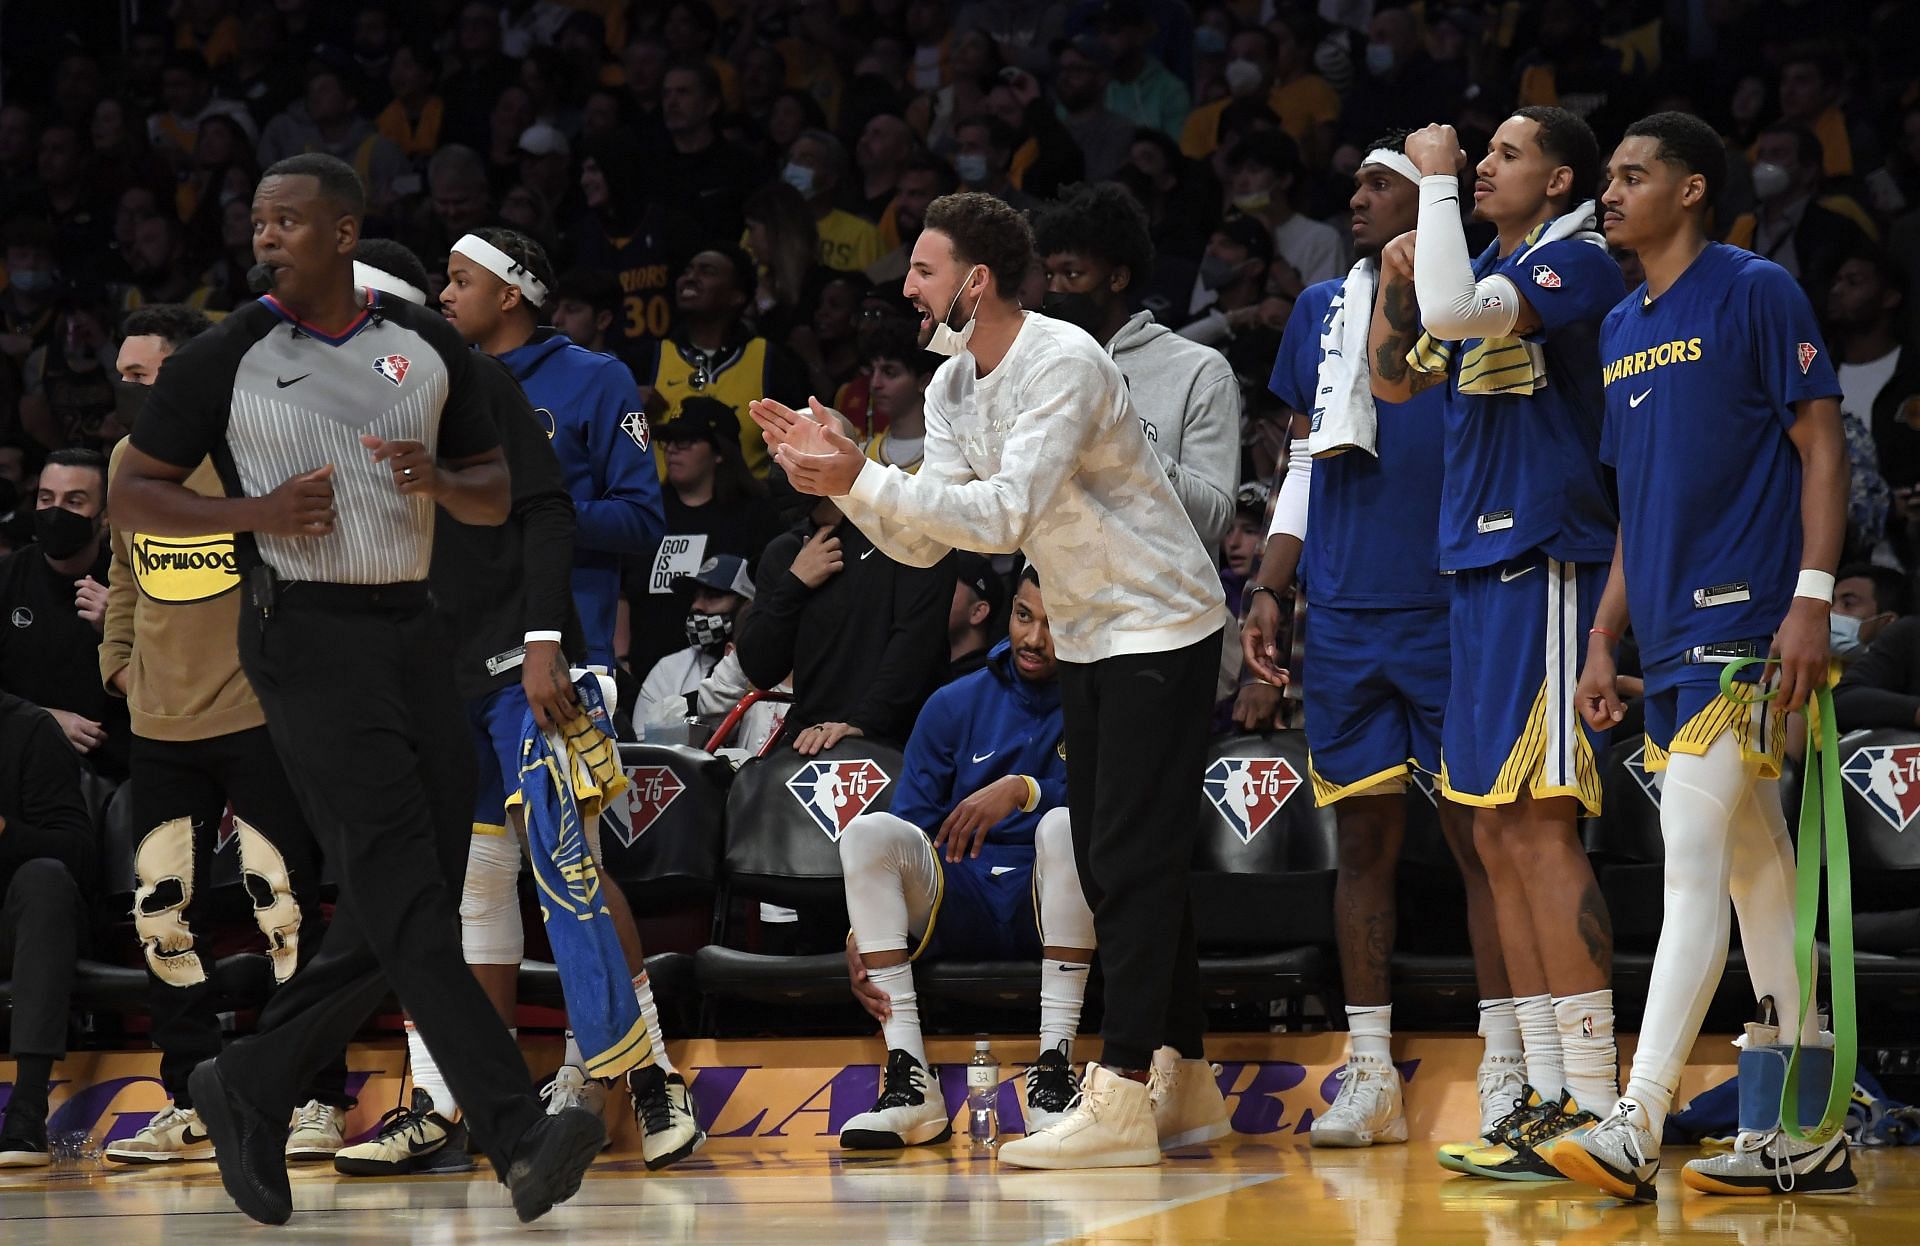 The Golden State Warriors bench reacts to a play vs the LA Lakers